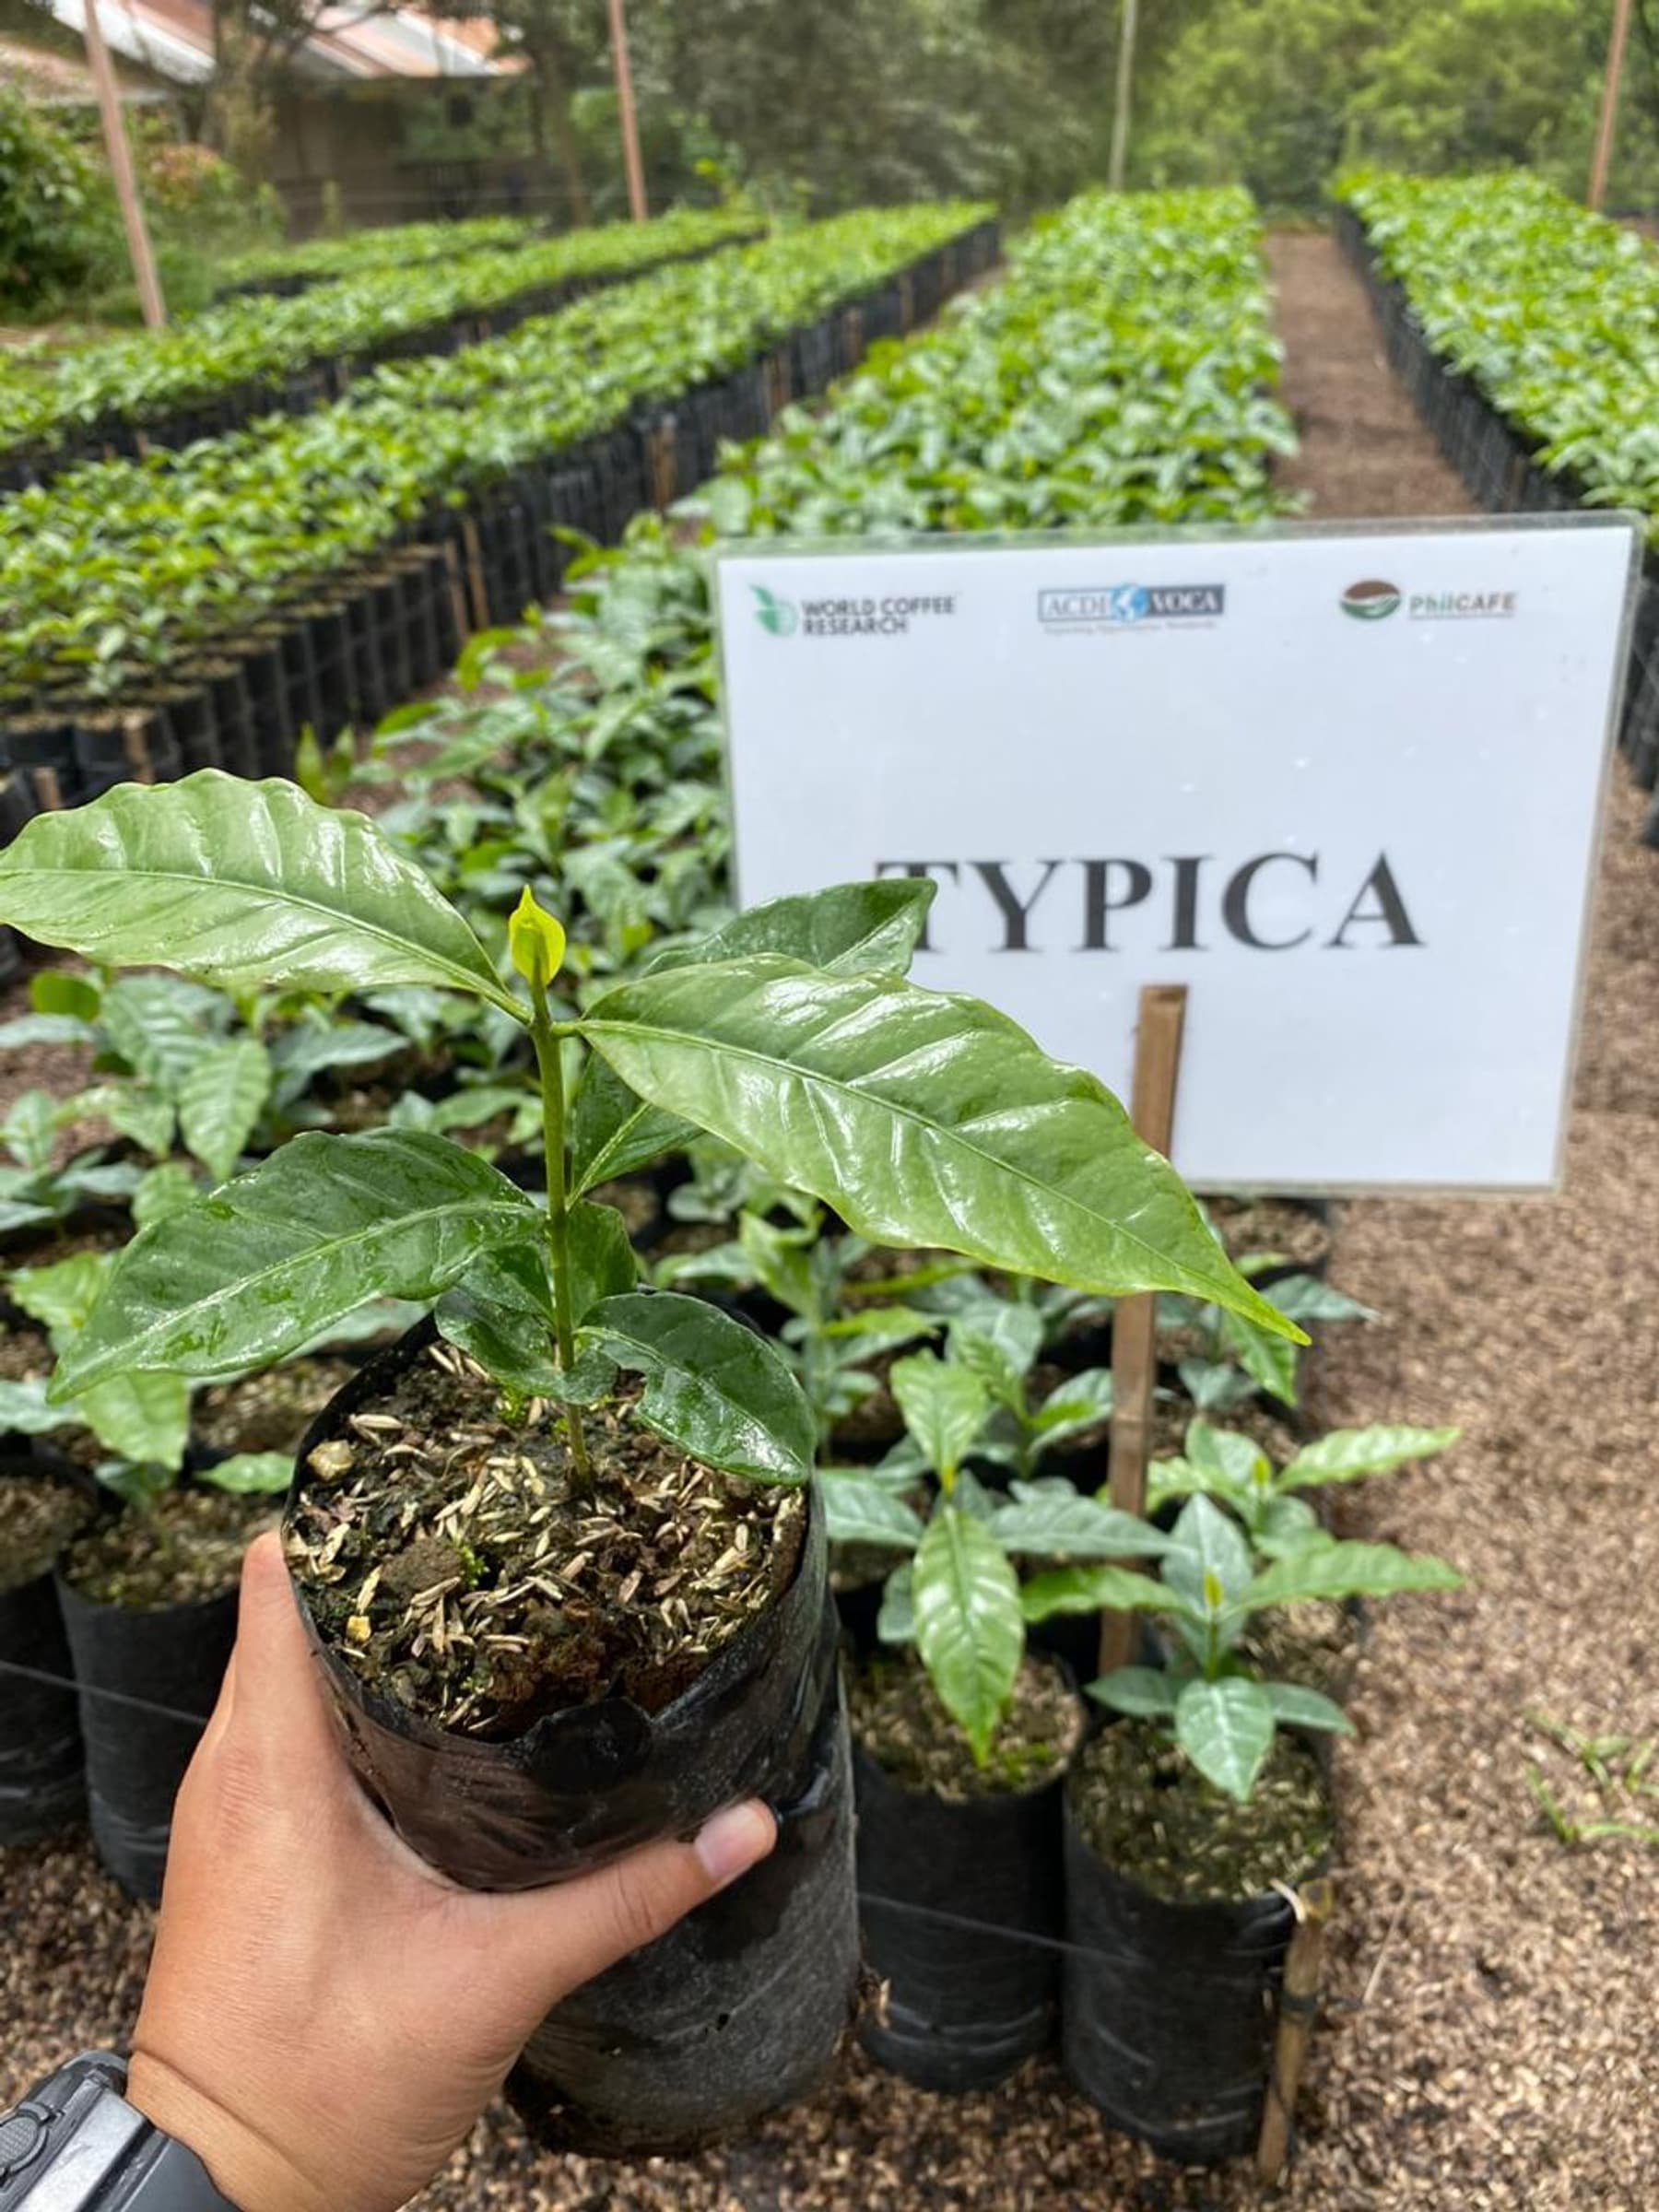 Typica plant being grown in a nursery for the PhilCAFE variety trials, 2021.